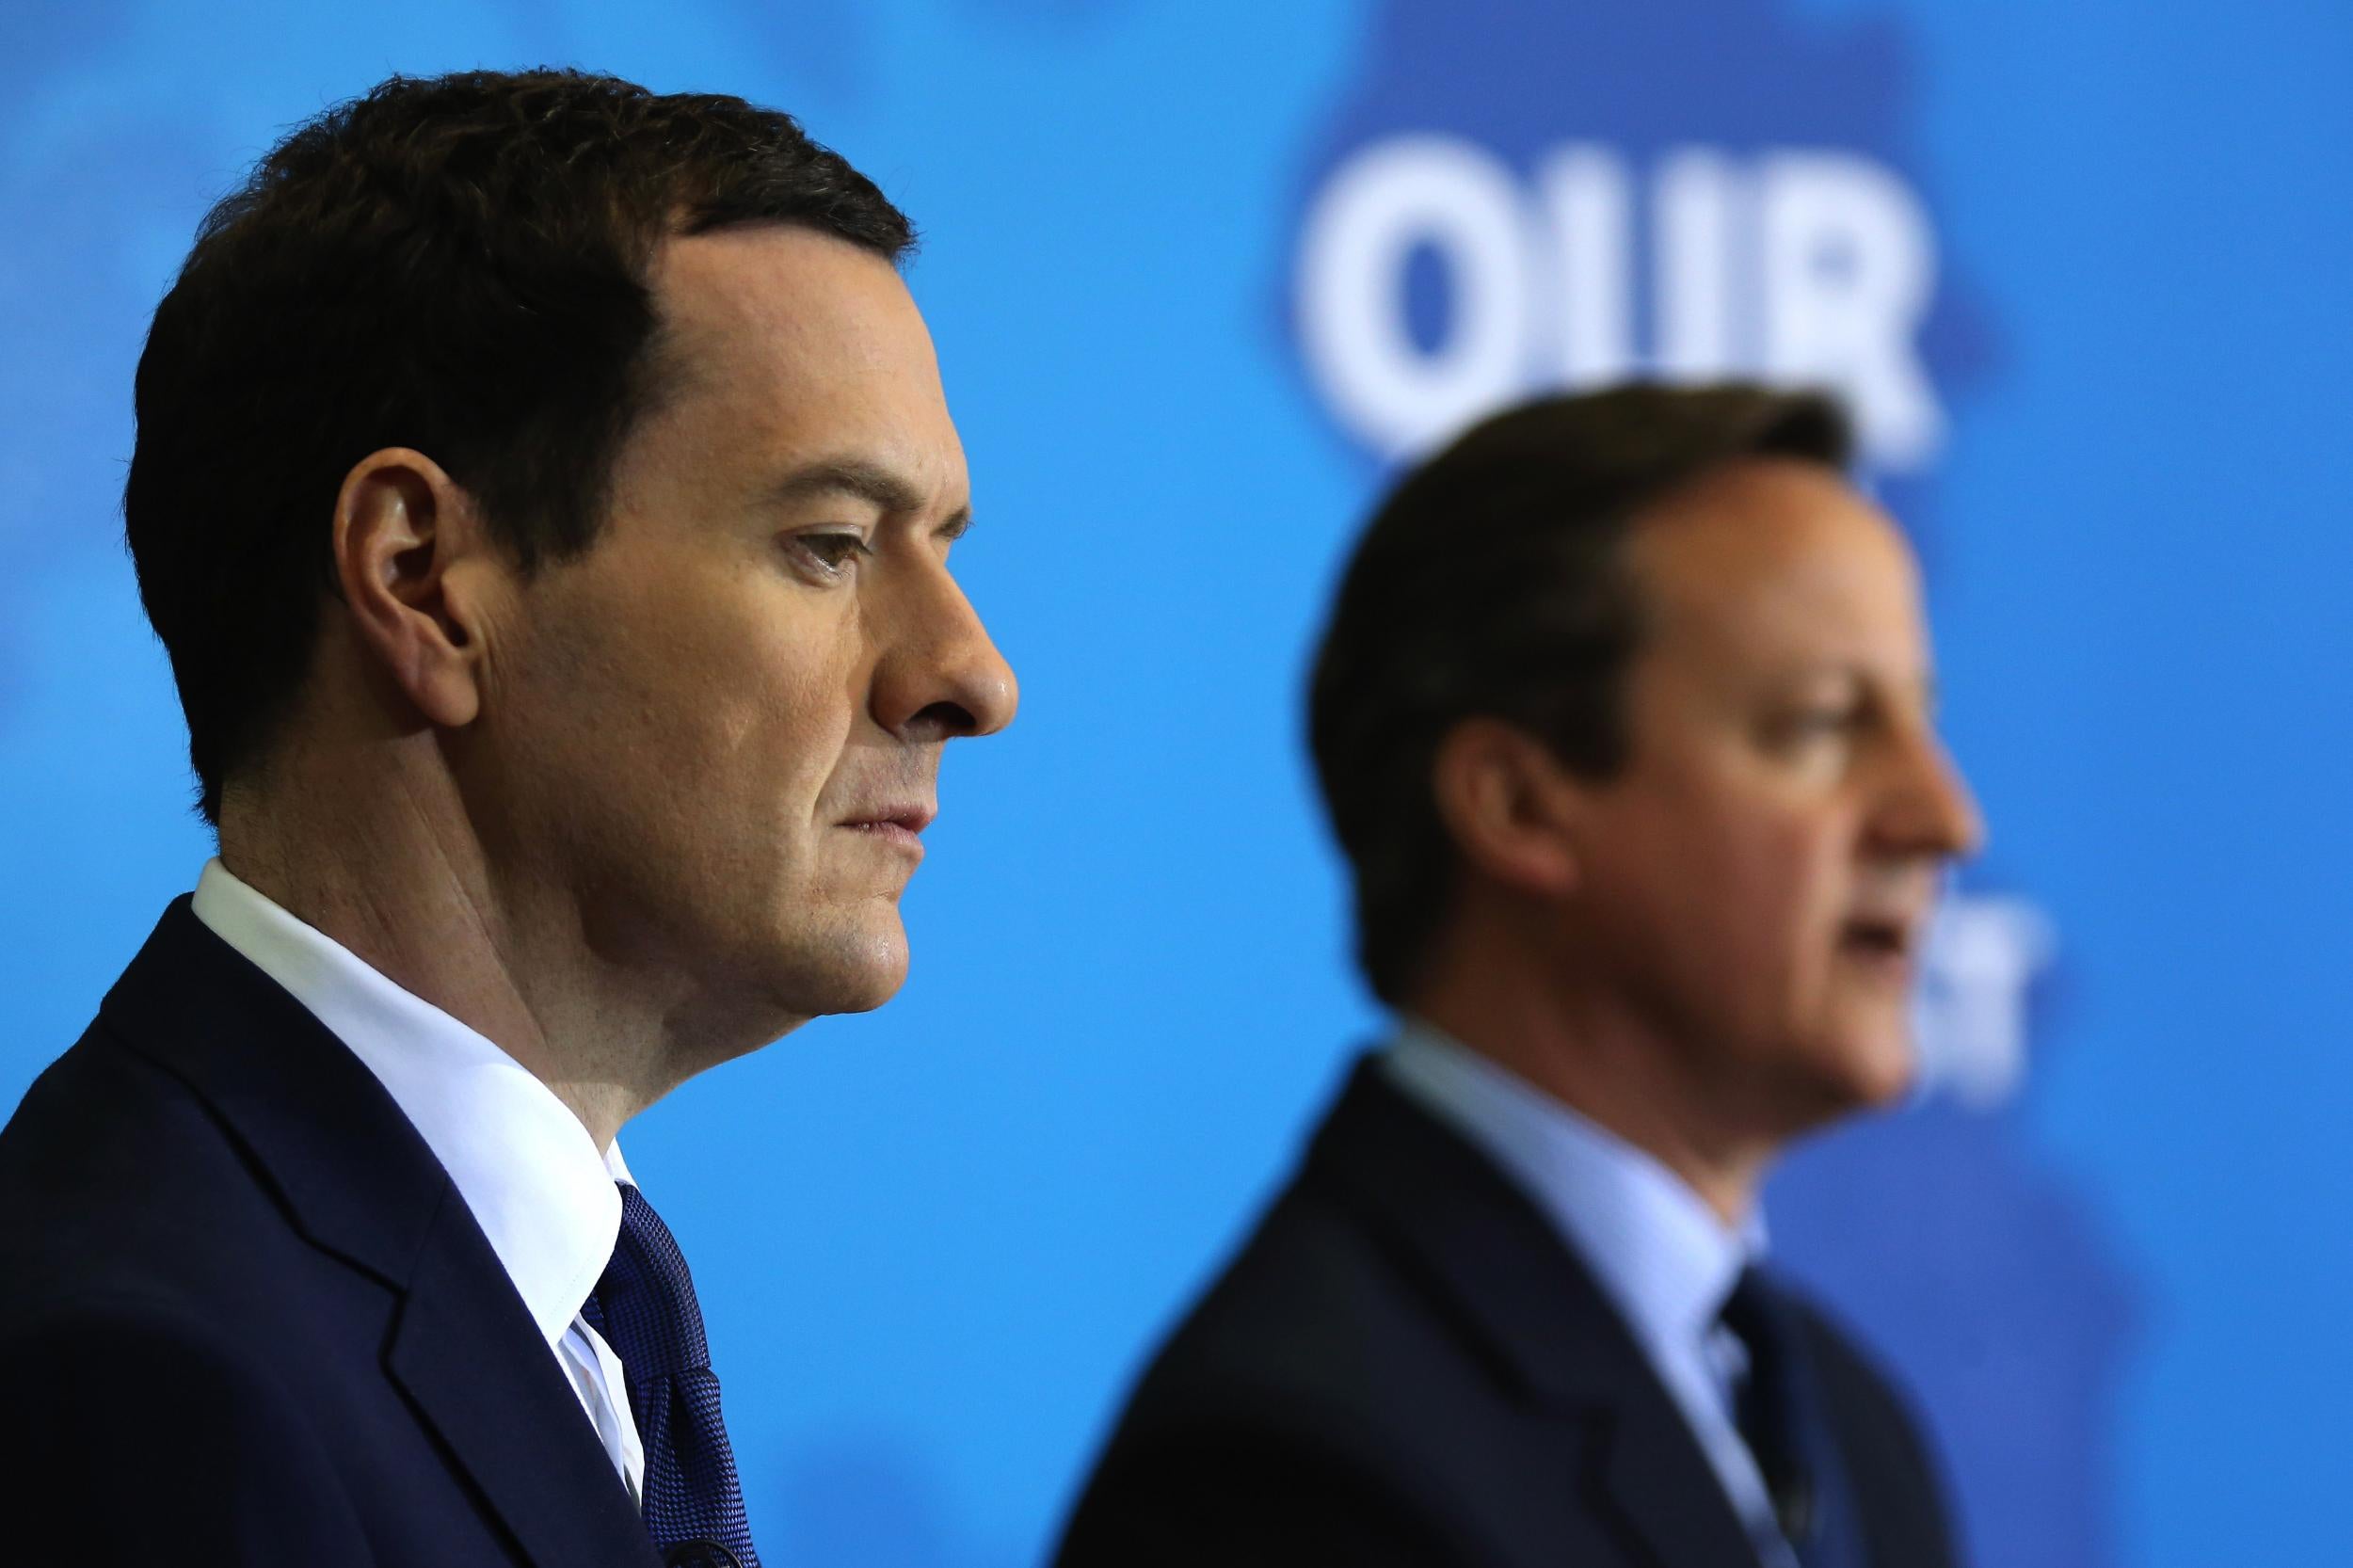 Osborne and Cameron talk about creating a fairer society, but their policies are making Britain more unequal.